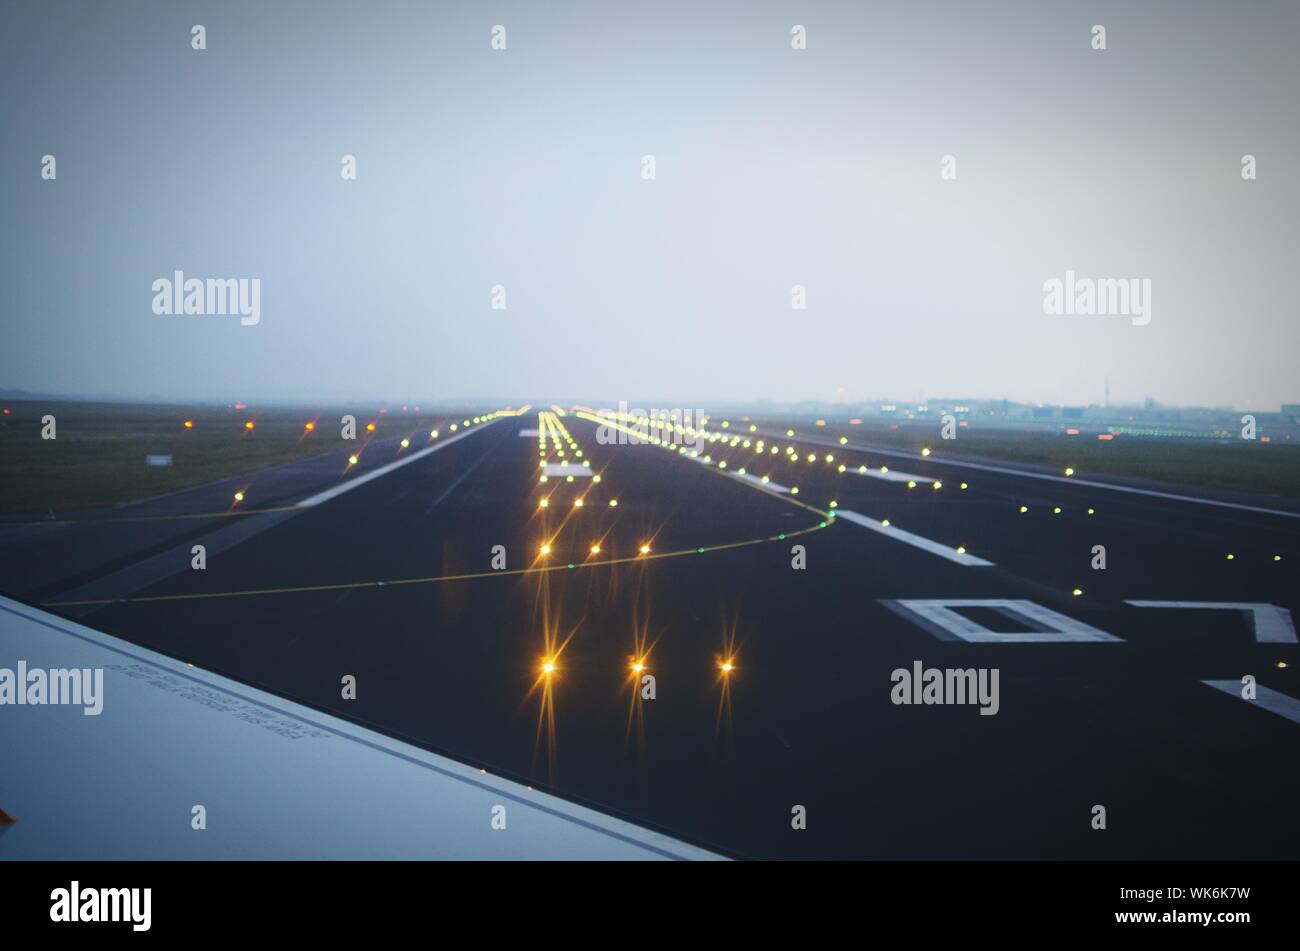 Cropped Image Of Airplane On Illuminated Airport Runway At Berlin Schonefeld Airport Stock Photo